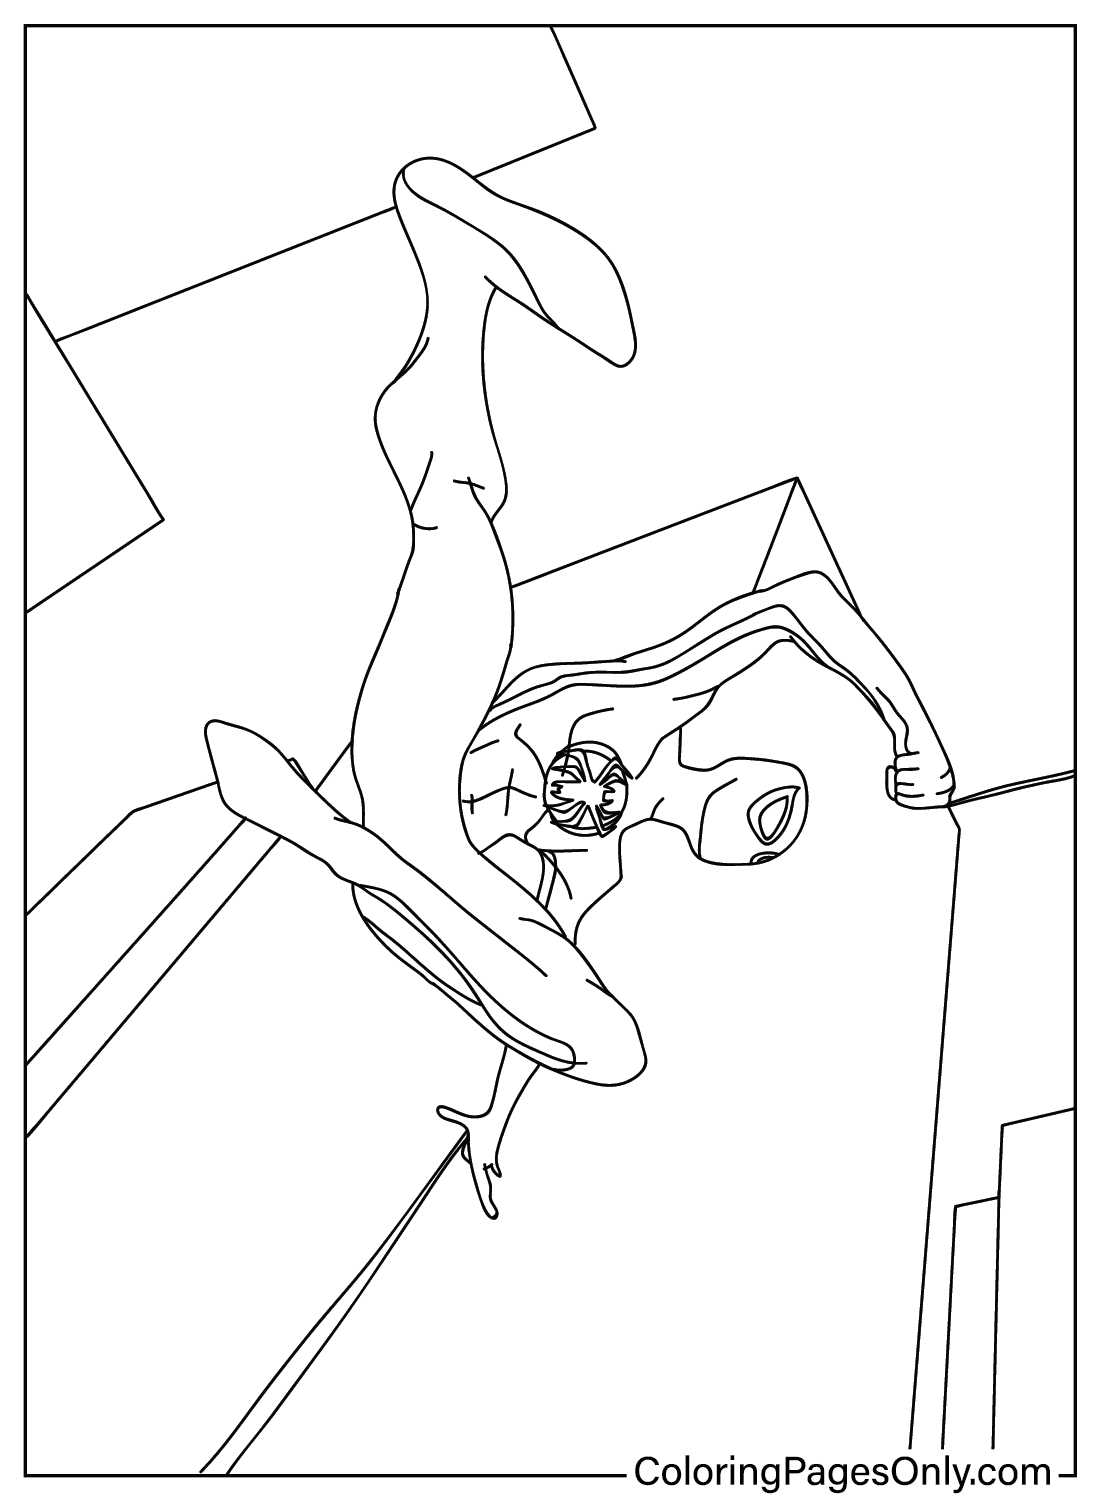 Spider-Man Across the Spider Coloring Pages to Printable from Spider-Man: Across the Spider